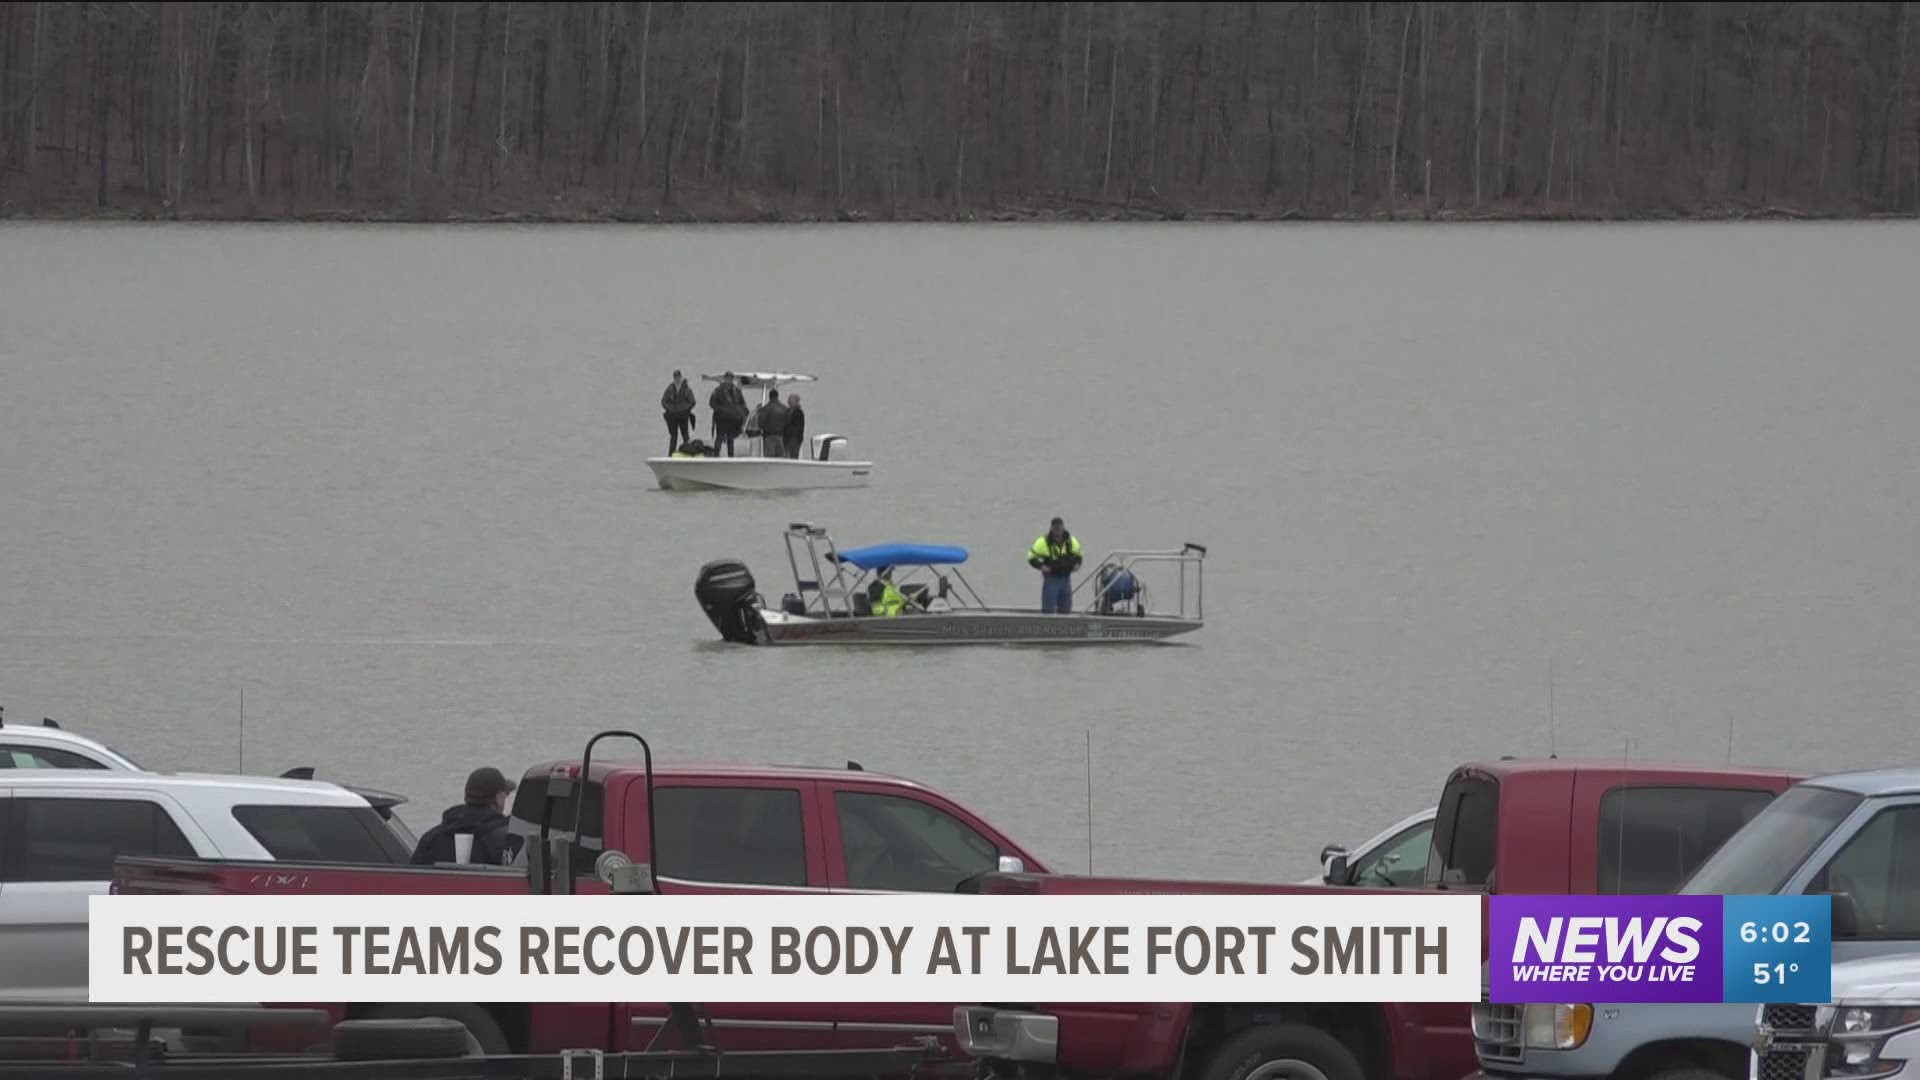 Rescue teams recover body at Lake Fort Smith